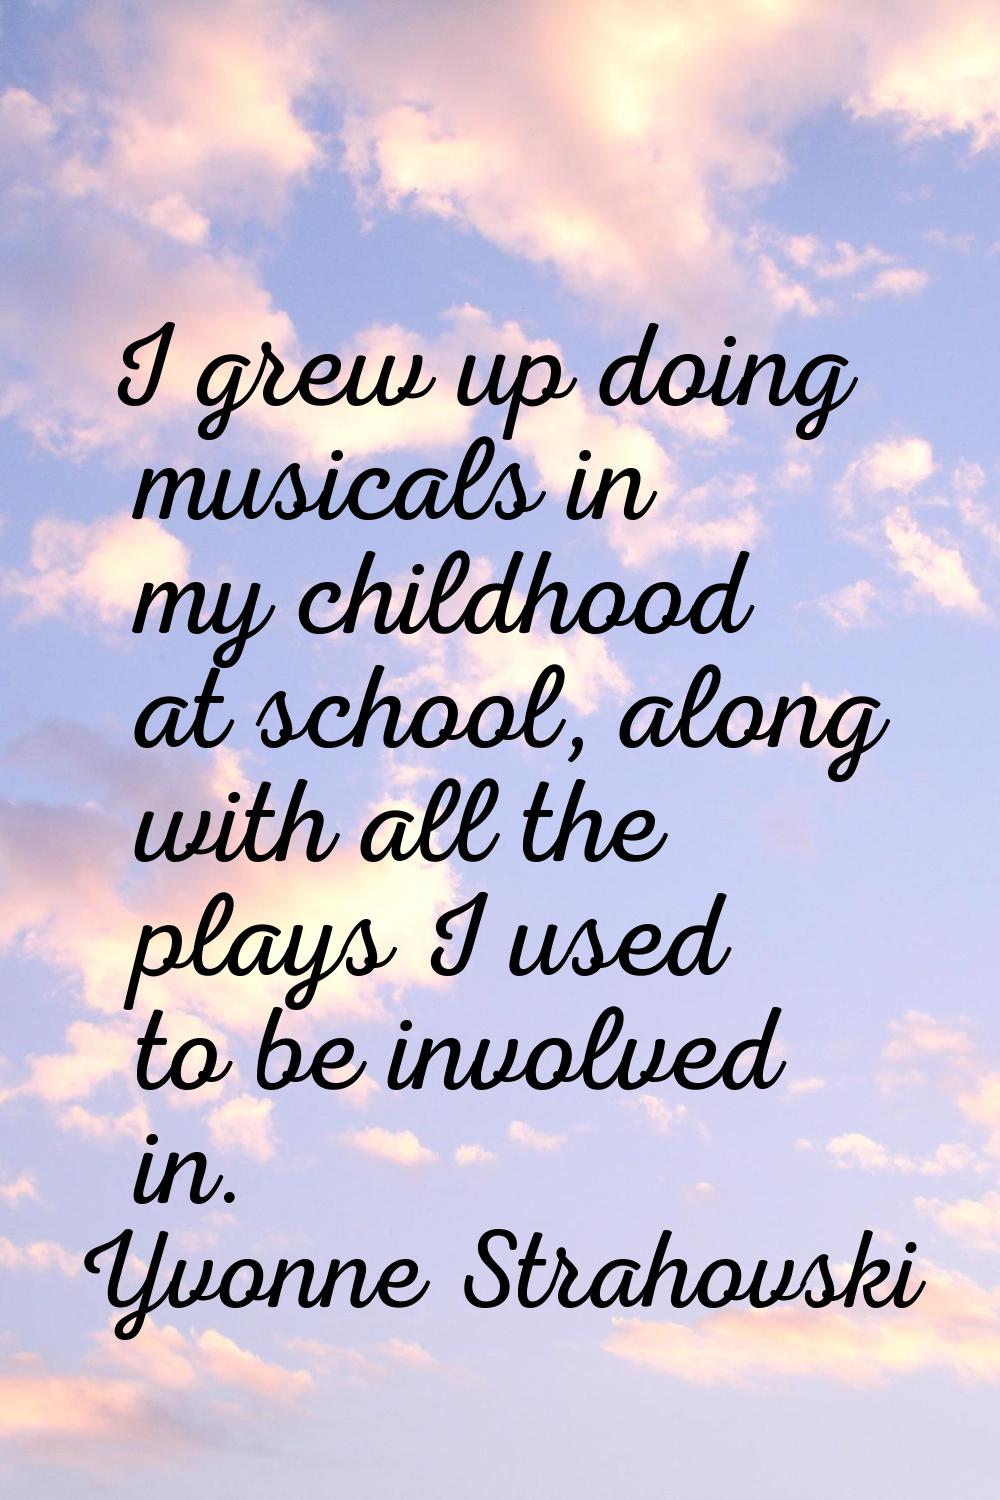 I grew up doing musicals in my childhood at school, along with all the plays I used to be involved 